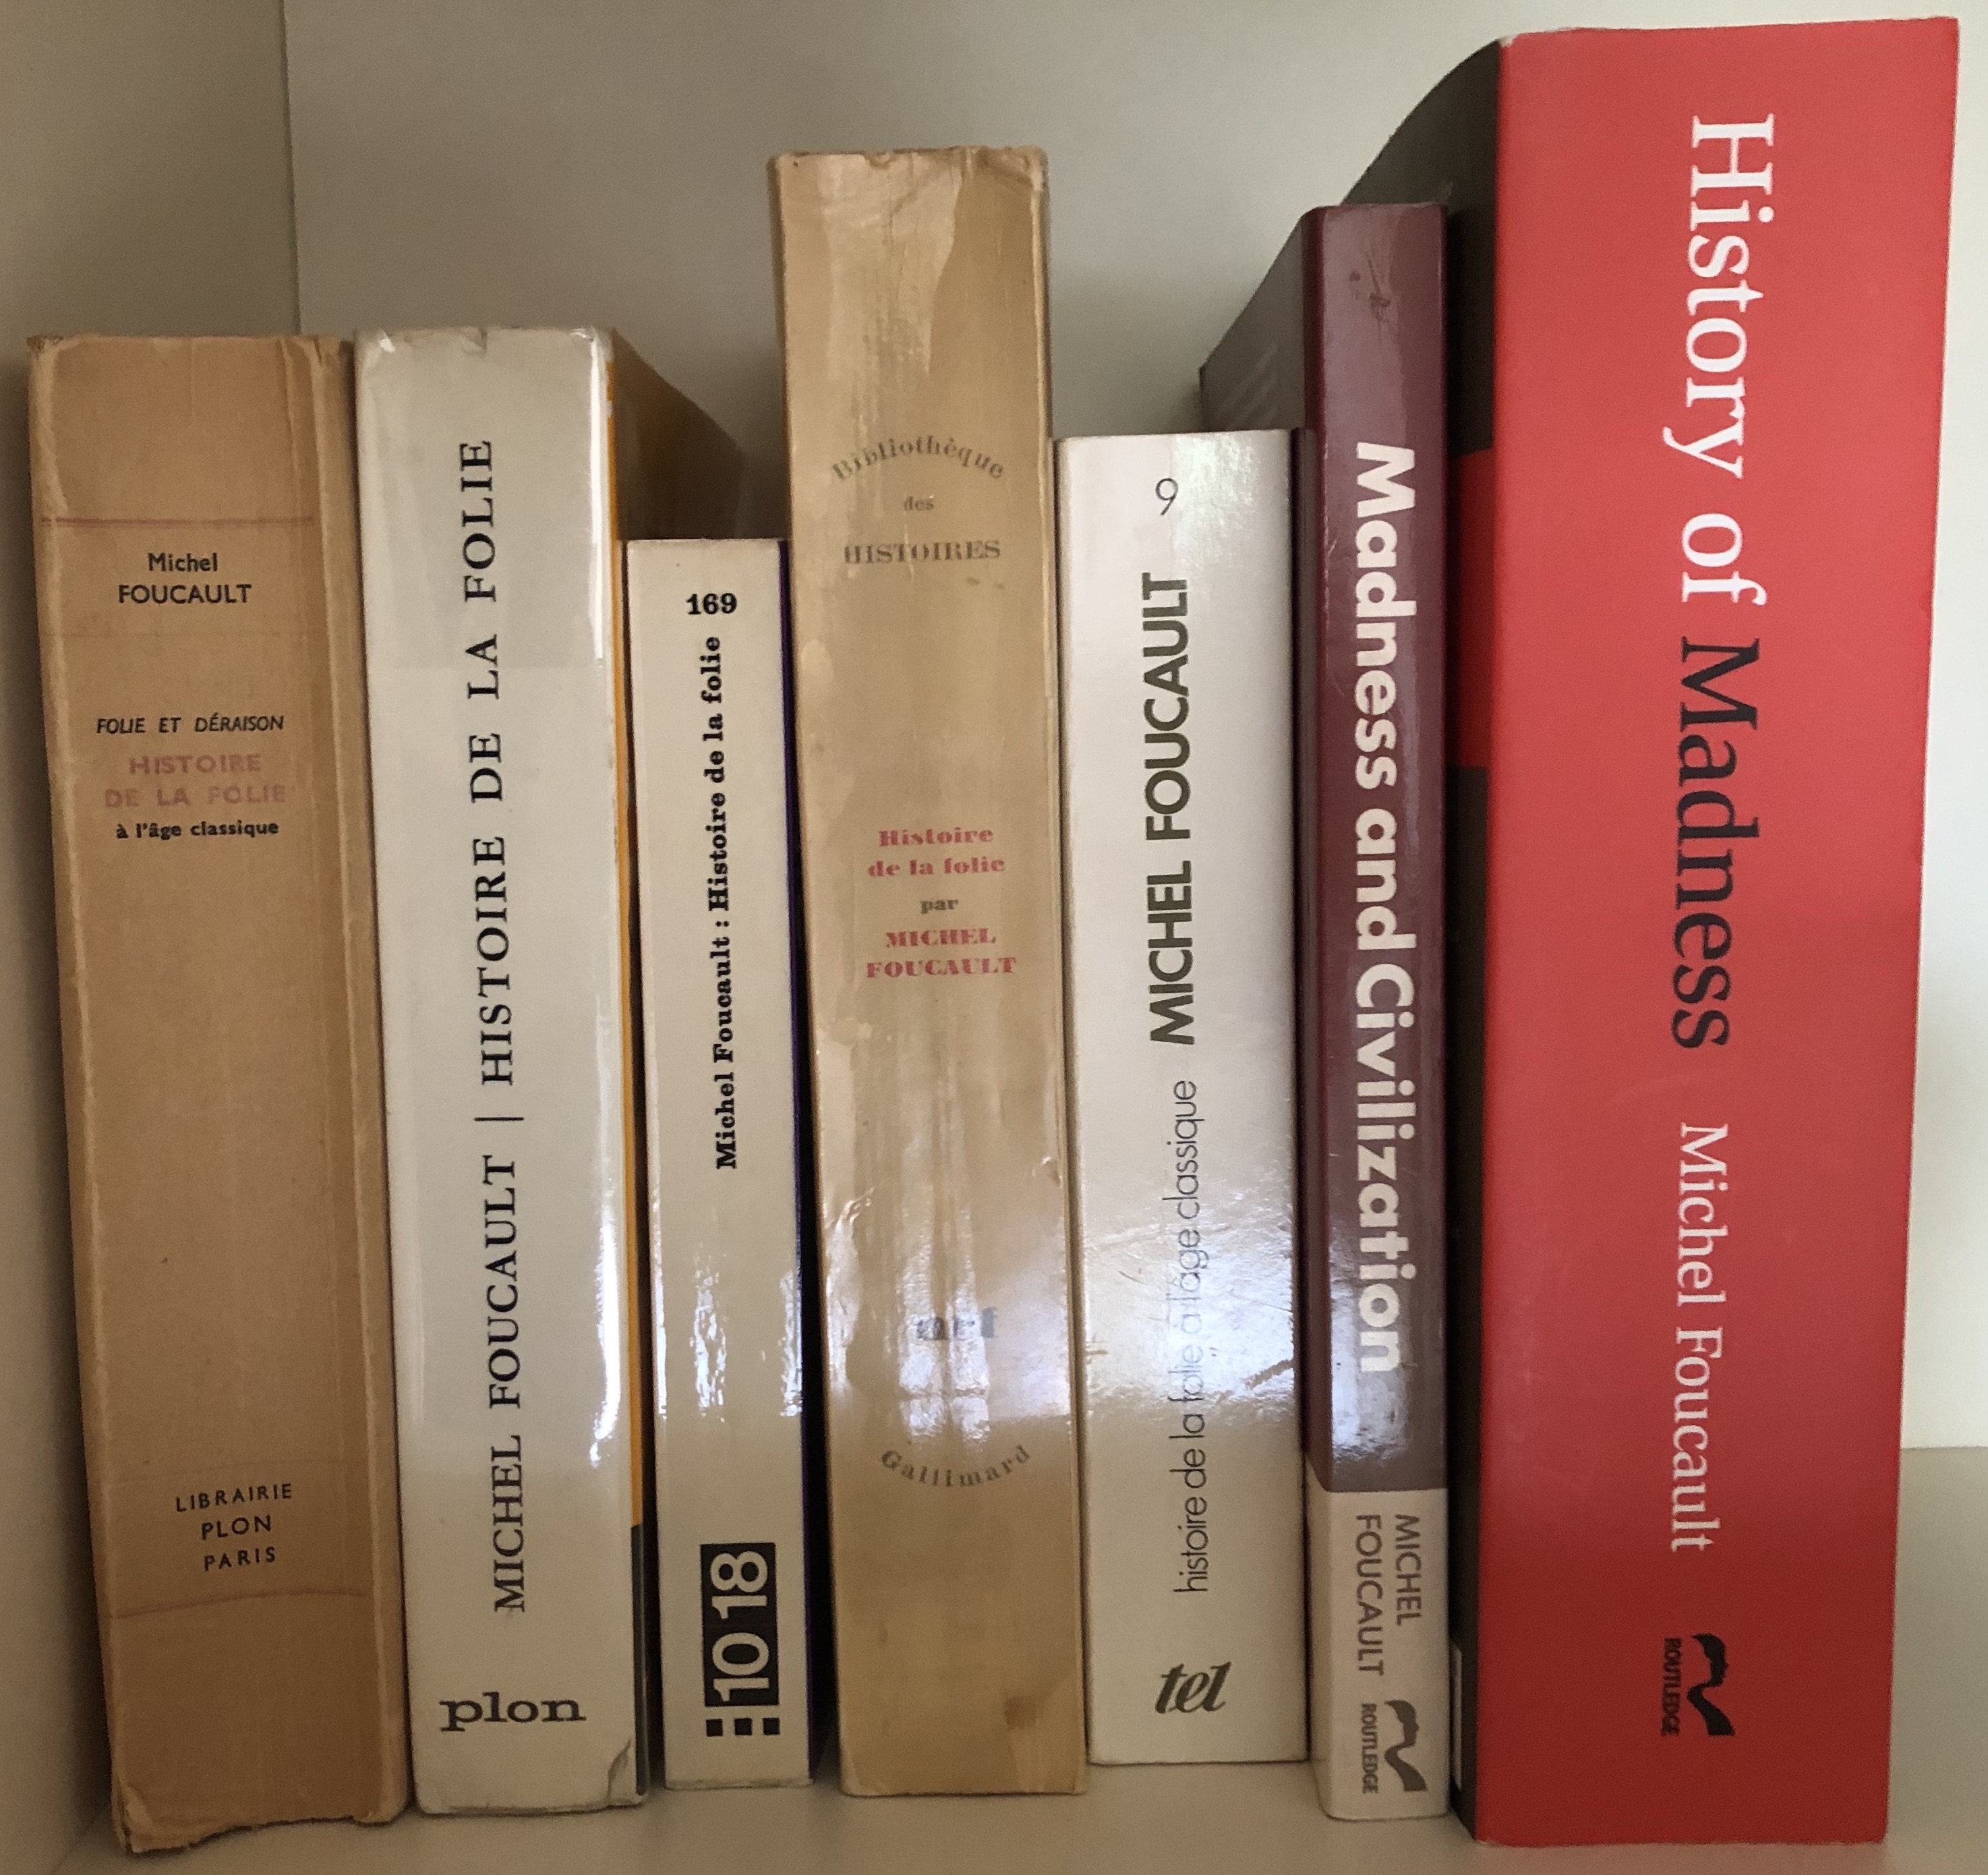 Foucault's History of Madness – a bibliographical chronology